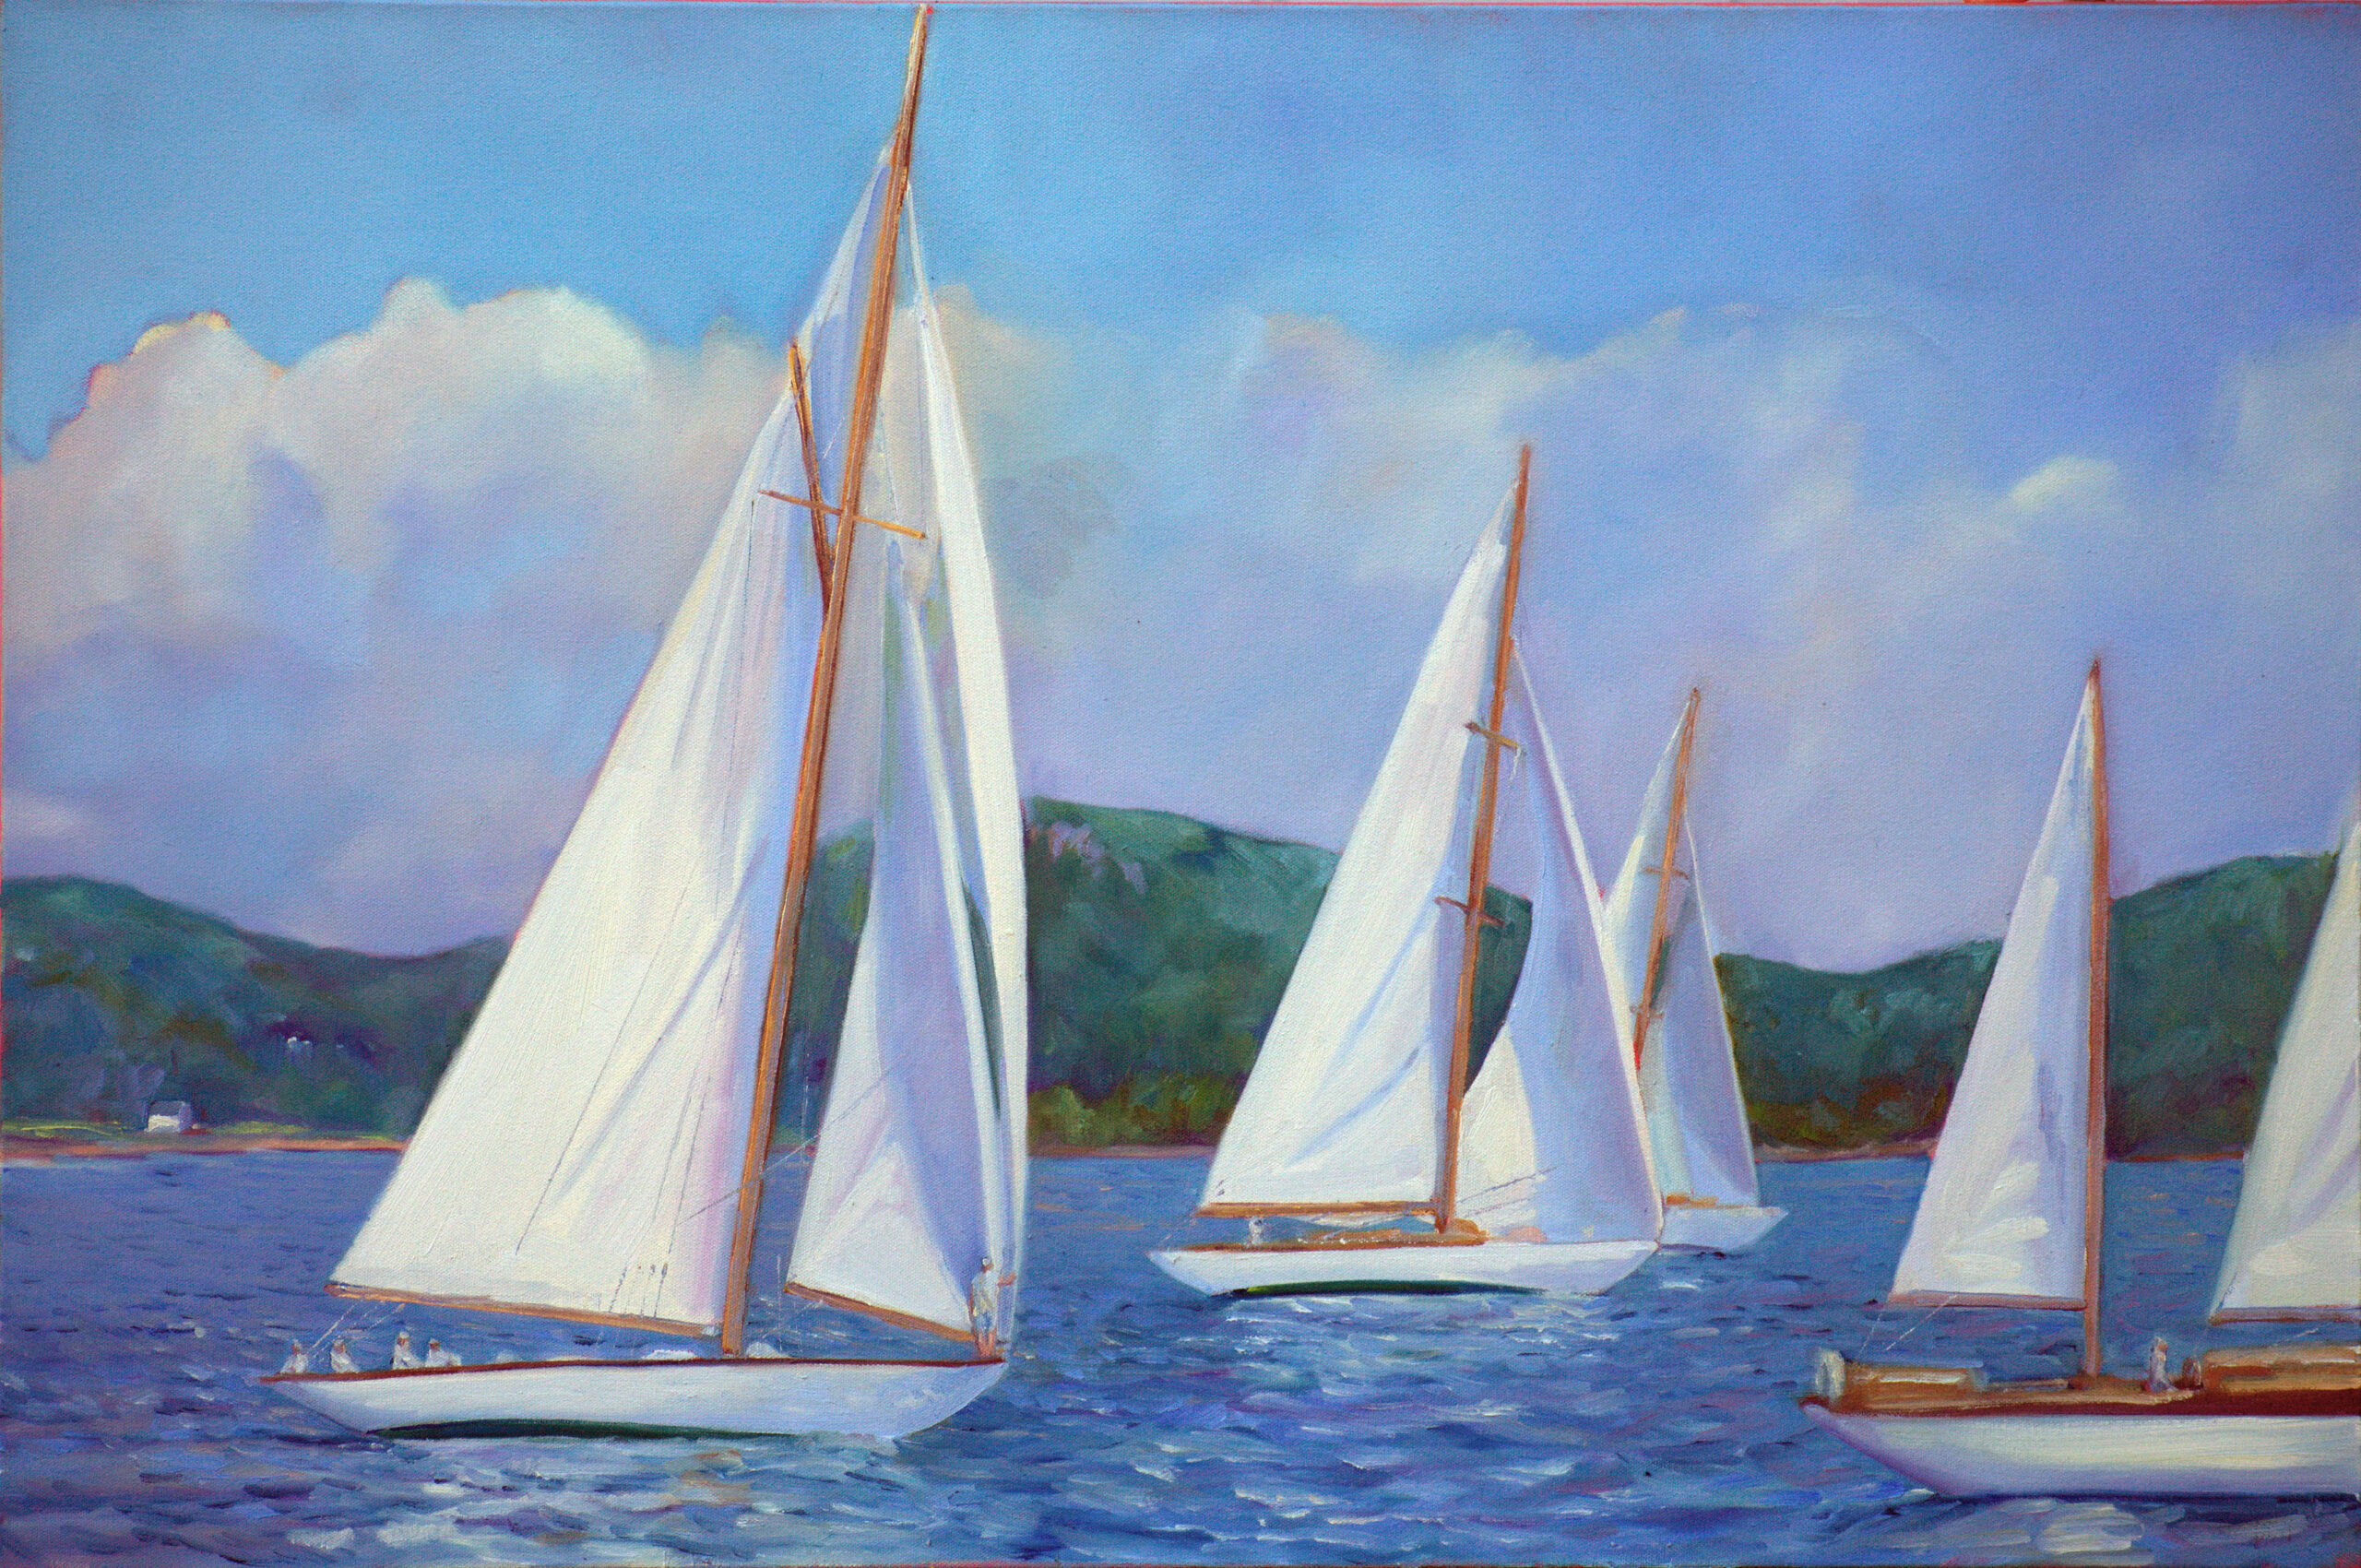 Skylarking, 24X36, oil on canvas, $3985 framed includes shipping and handling in continental US.